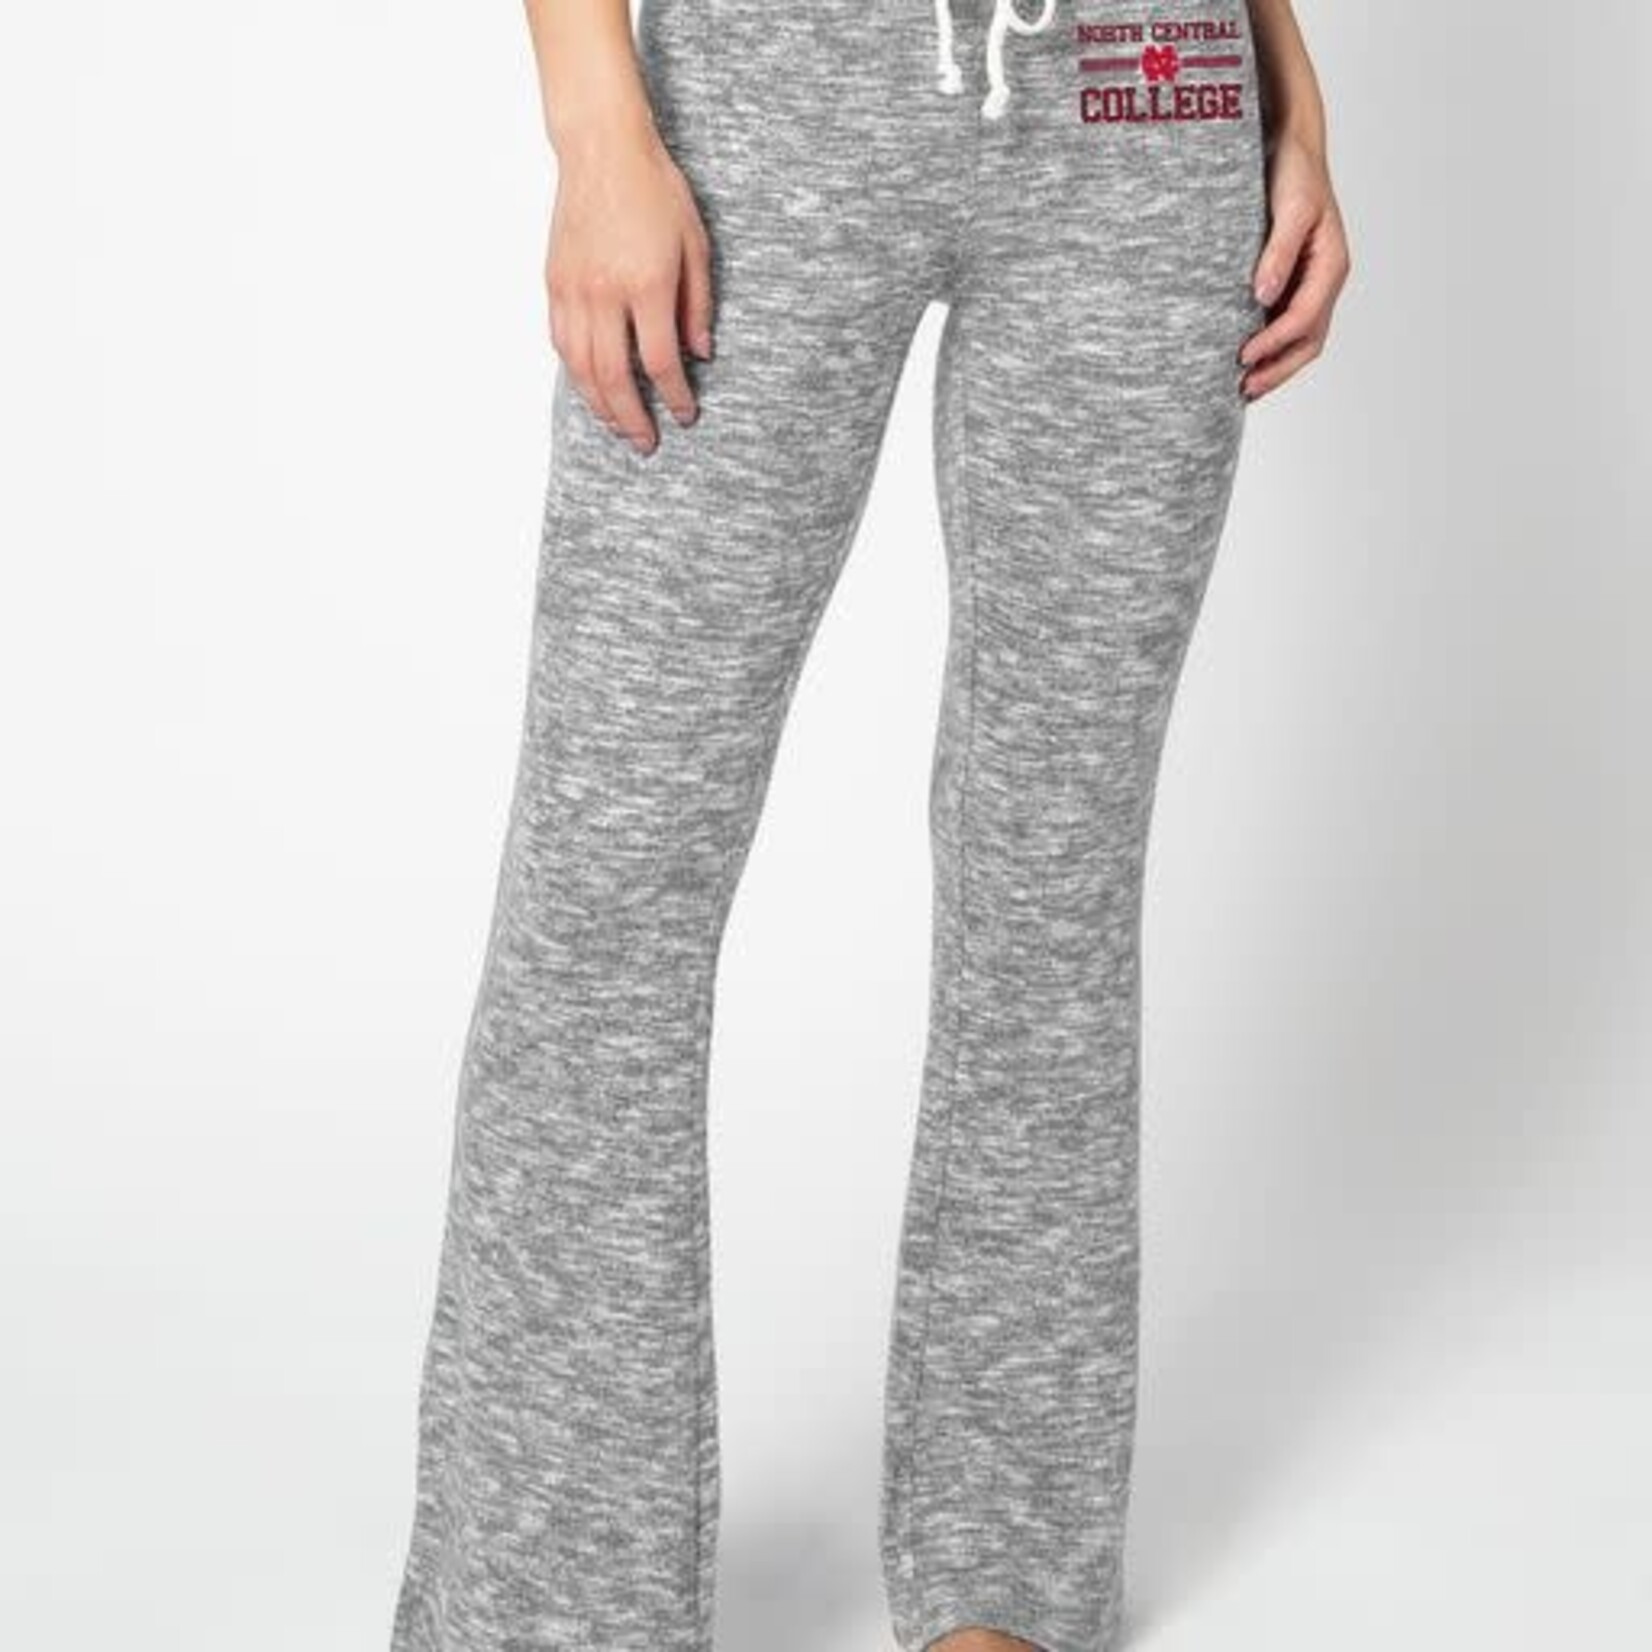 Chicka-d Comfy Flare Pants by Chicka-d